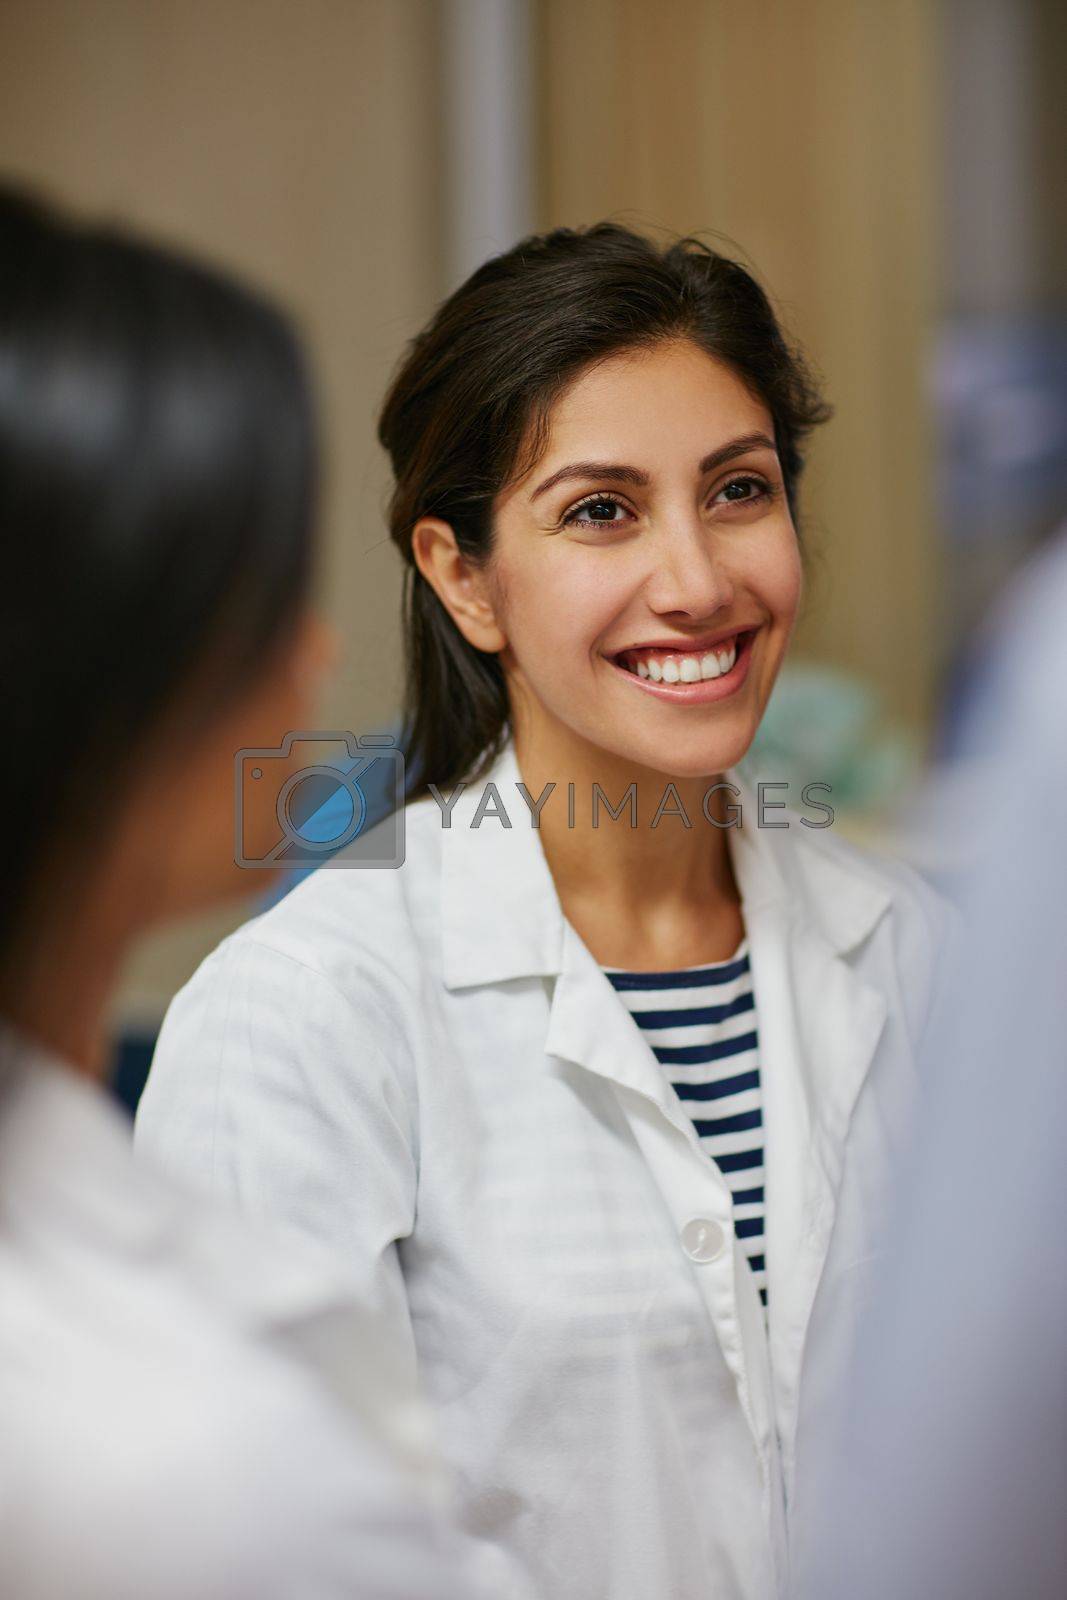 Royalty free image of Sharing her healthcare ideas. a doctor working in a hospital. by YuriArcurs